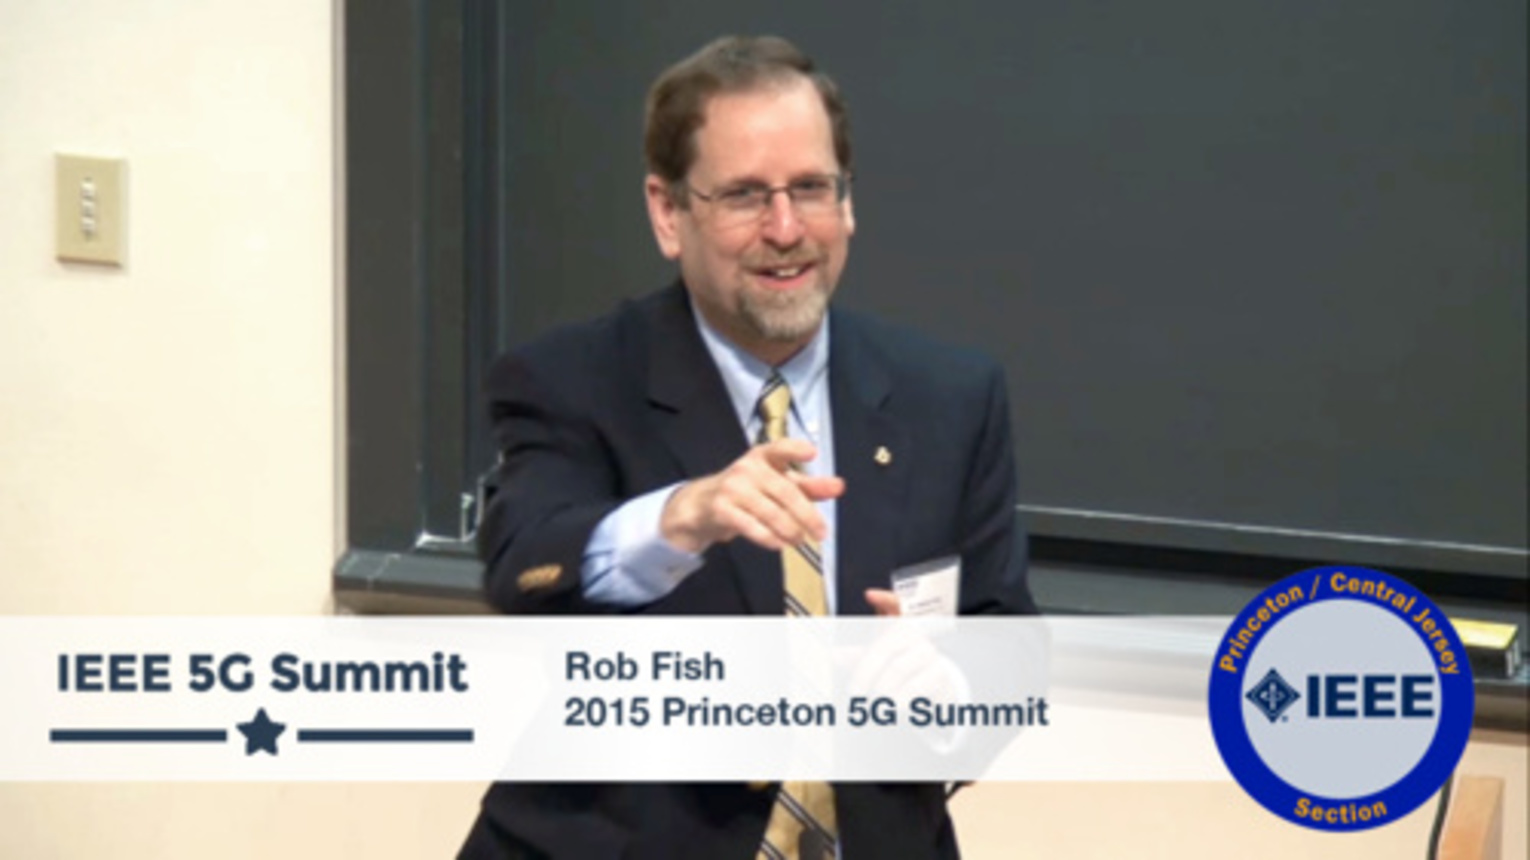 Princeton 5G Summit - Robert S. Fish Keynote - No Man (or Woman) left Behind - Opportunities for All